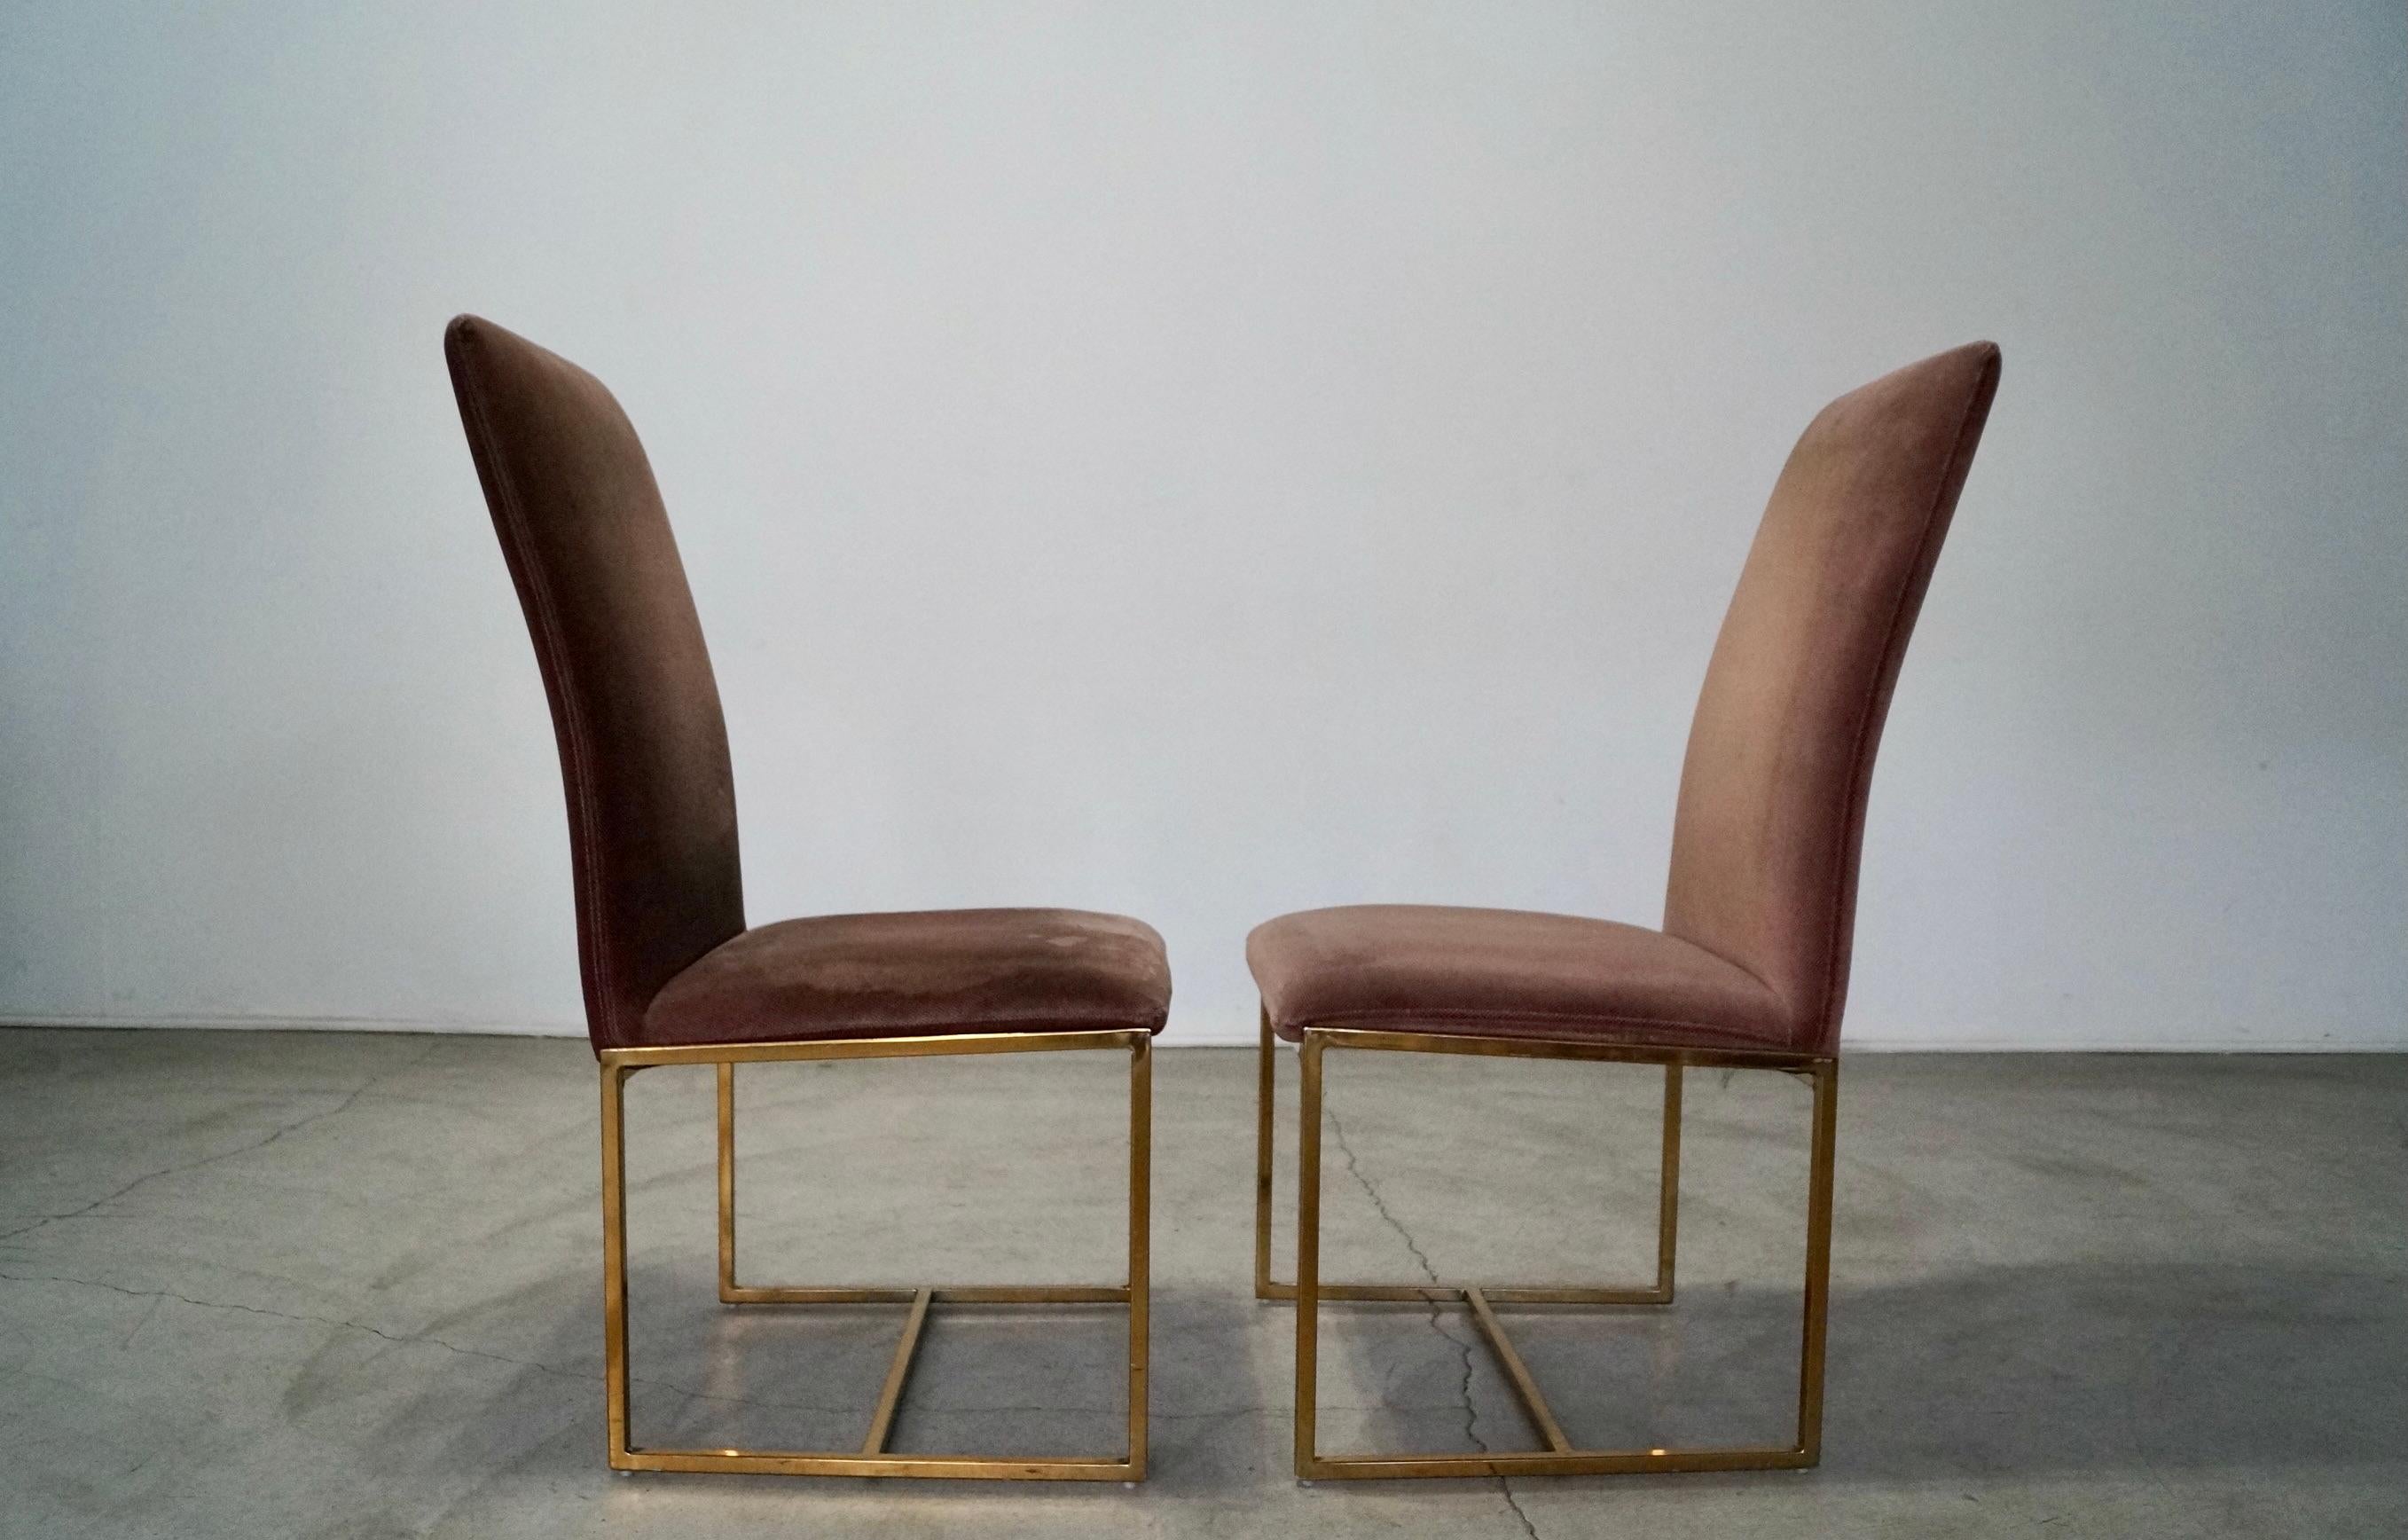 1970's Mid-Century Modern Milo Baughman Style Brass Dining Chairs - a Pair For Sale 3